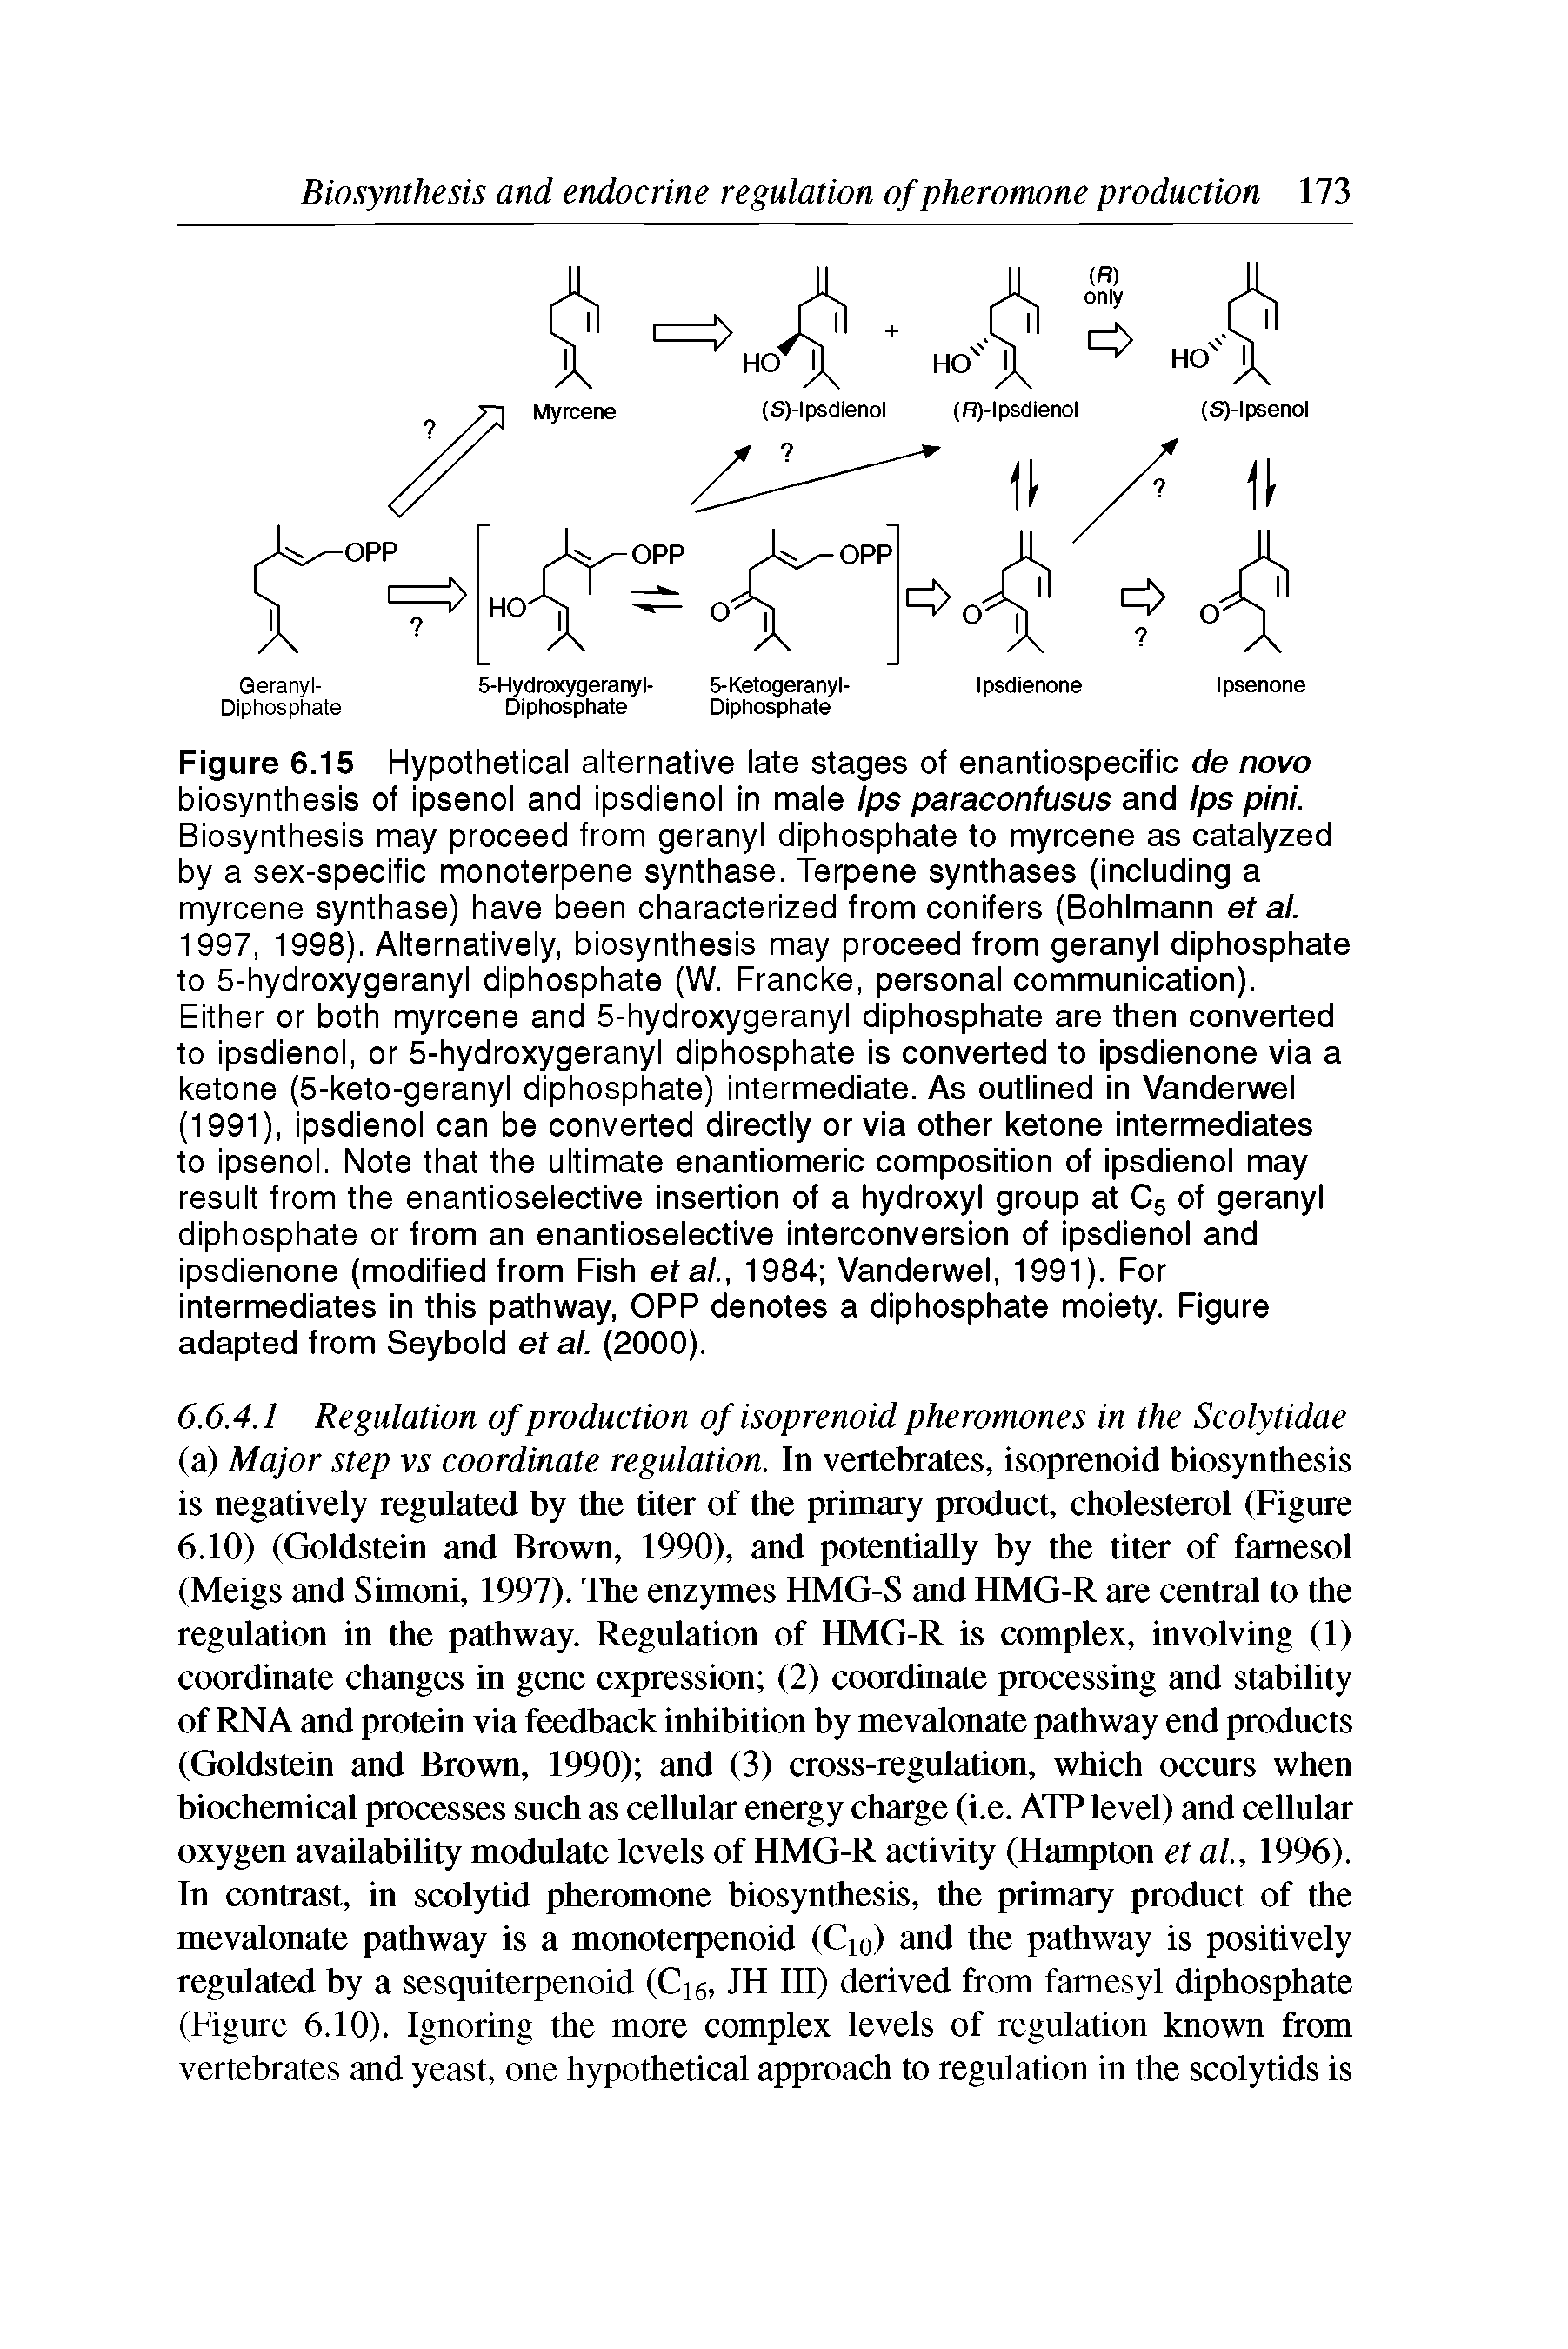 Figure 6.15 Hypothetical alternative late stages of enantiospecific de novo biosynthesis of ipsenol and ipsdienol in male Ips paraconfusus and Ips pini. Biosynthesis may proceed from geranyl diphosphate to myrcene as catalyzed by a sex-specific monoterpene synthase. Terpene synthases (including a myrcene synthase) have been characterized from conifers (Bohlmann et al. 1997, 1998). Alternatively, biosynthesis may proceed from geranyl diphosphate to 5-hydroxygeranyl diphosphate (W. Francke, personal communication).